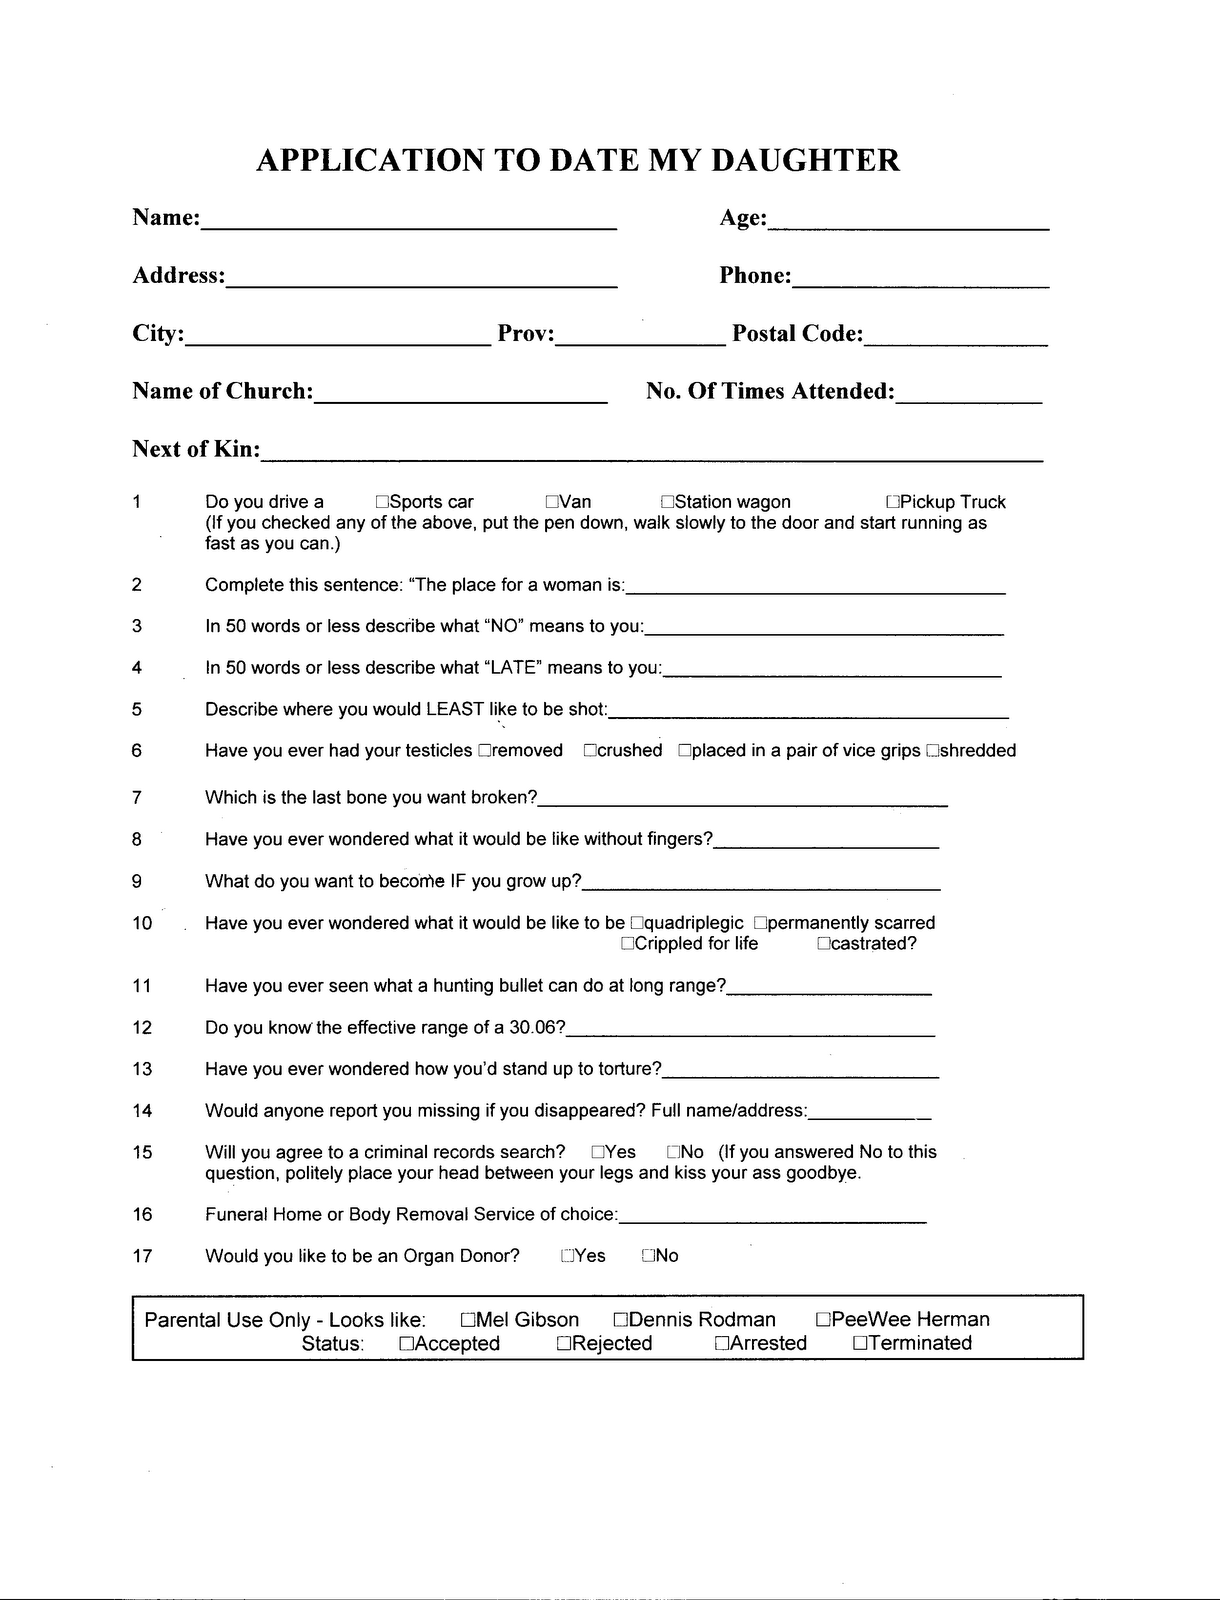 Application Form Application Form To Date My Daughter